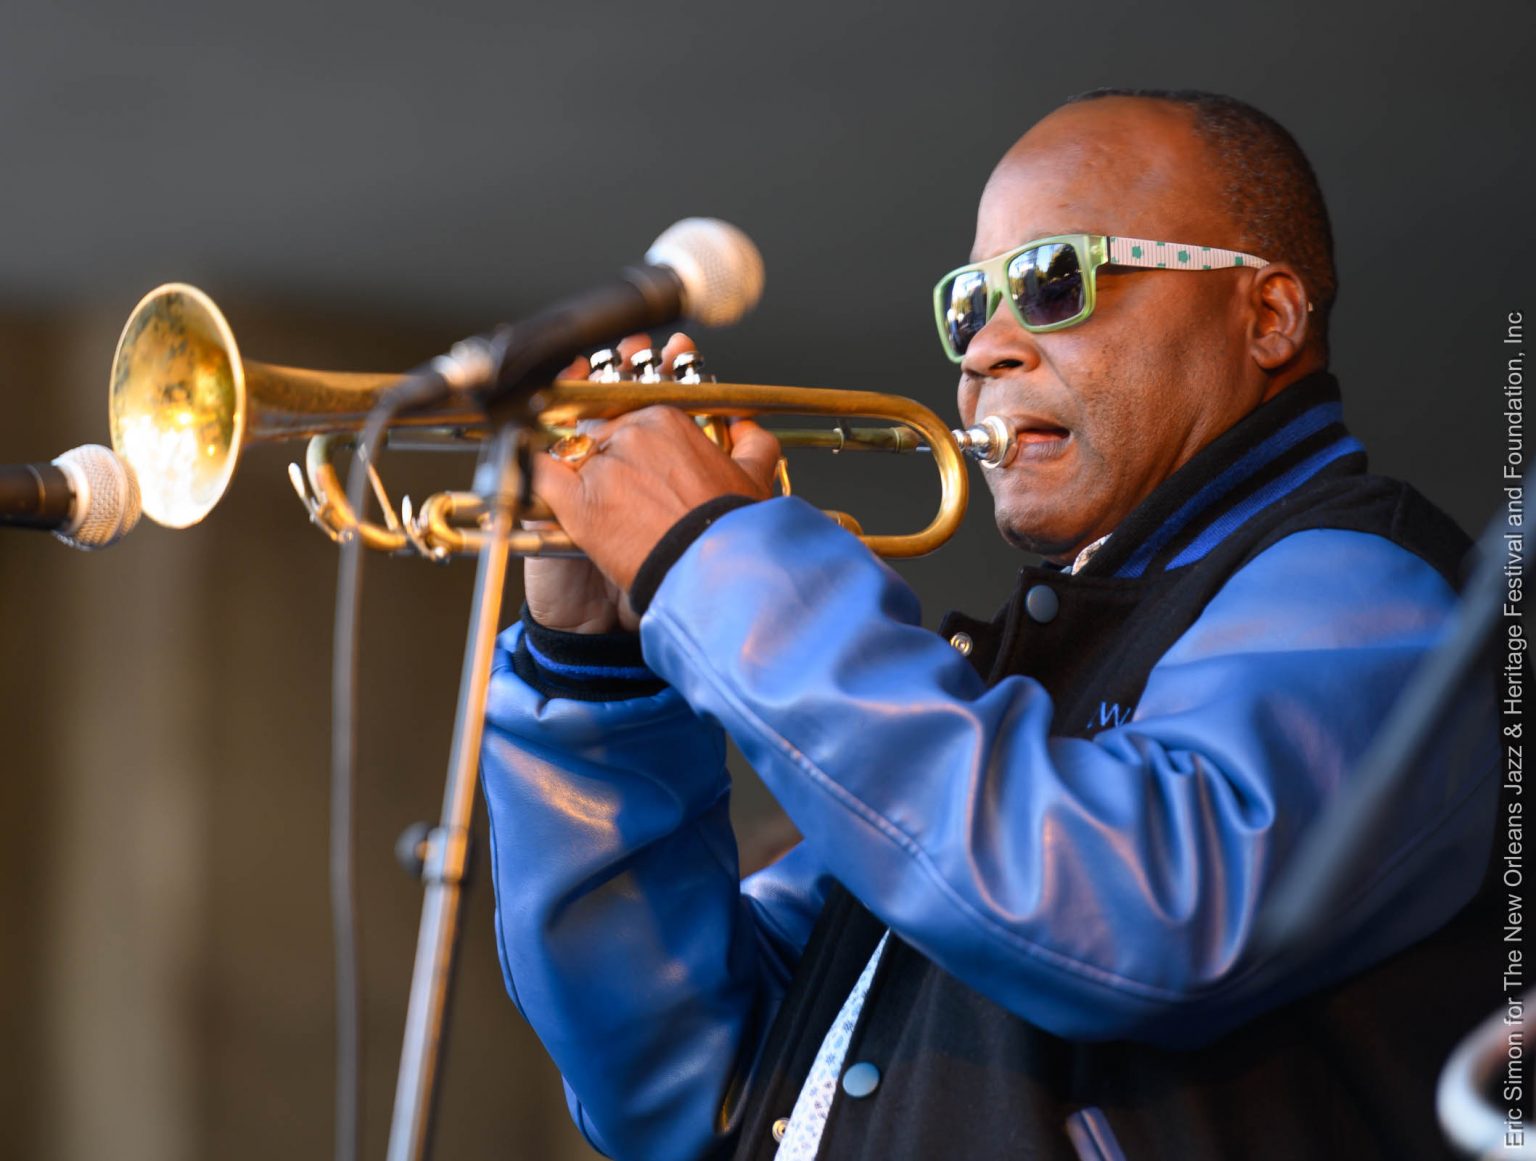 2019 Treme Creole Gumbo Festival, James Andrews & the Crescent City All-Stars, New Orleans